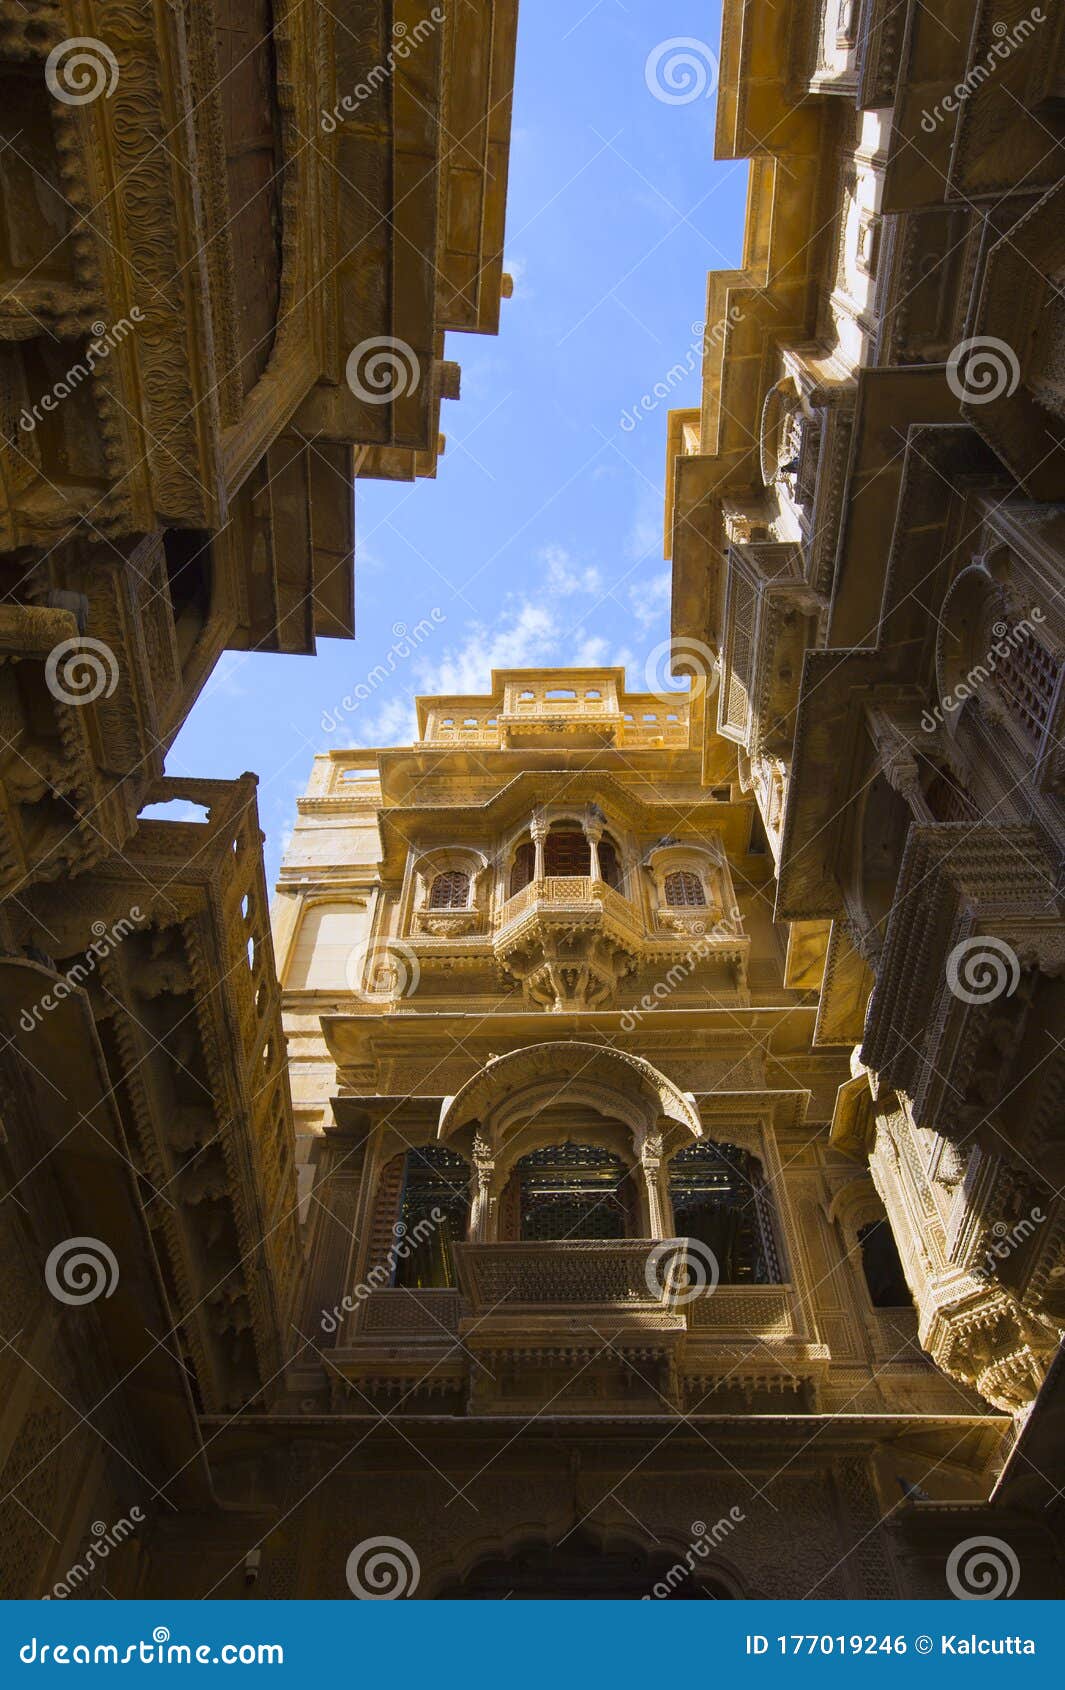 Best Hikes and Trails in Jaisalmer | AllTrails